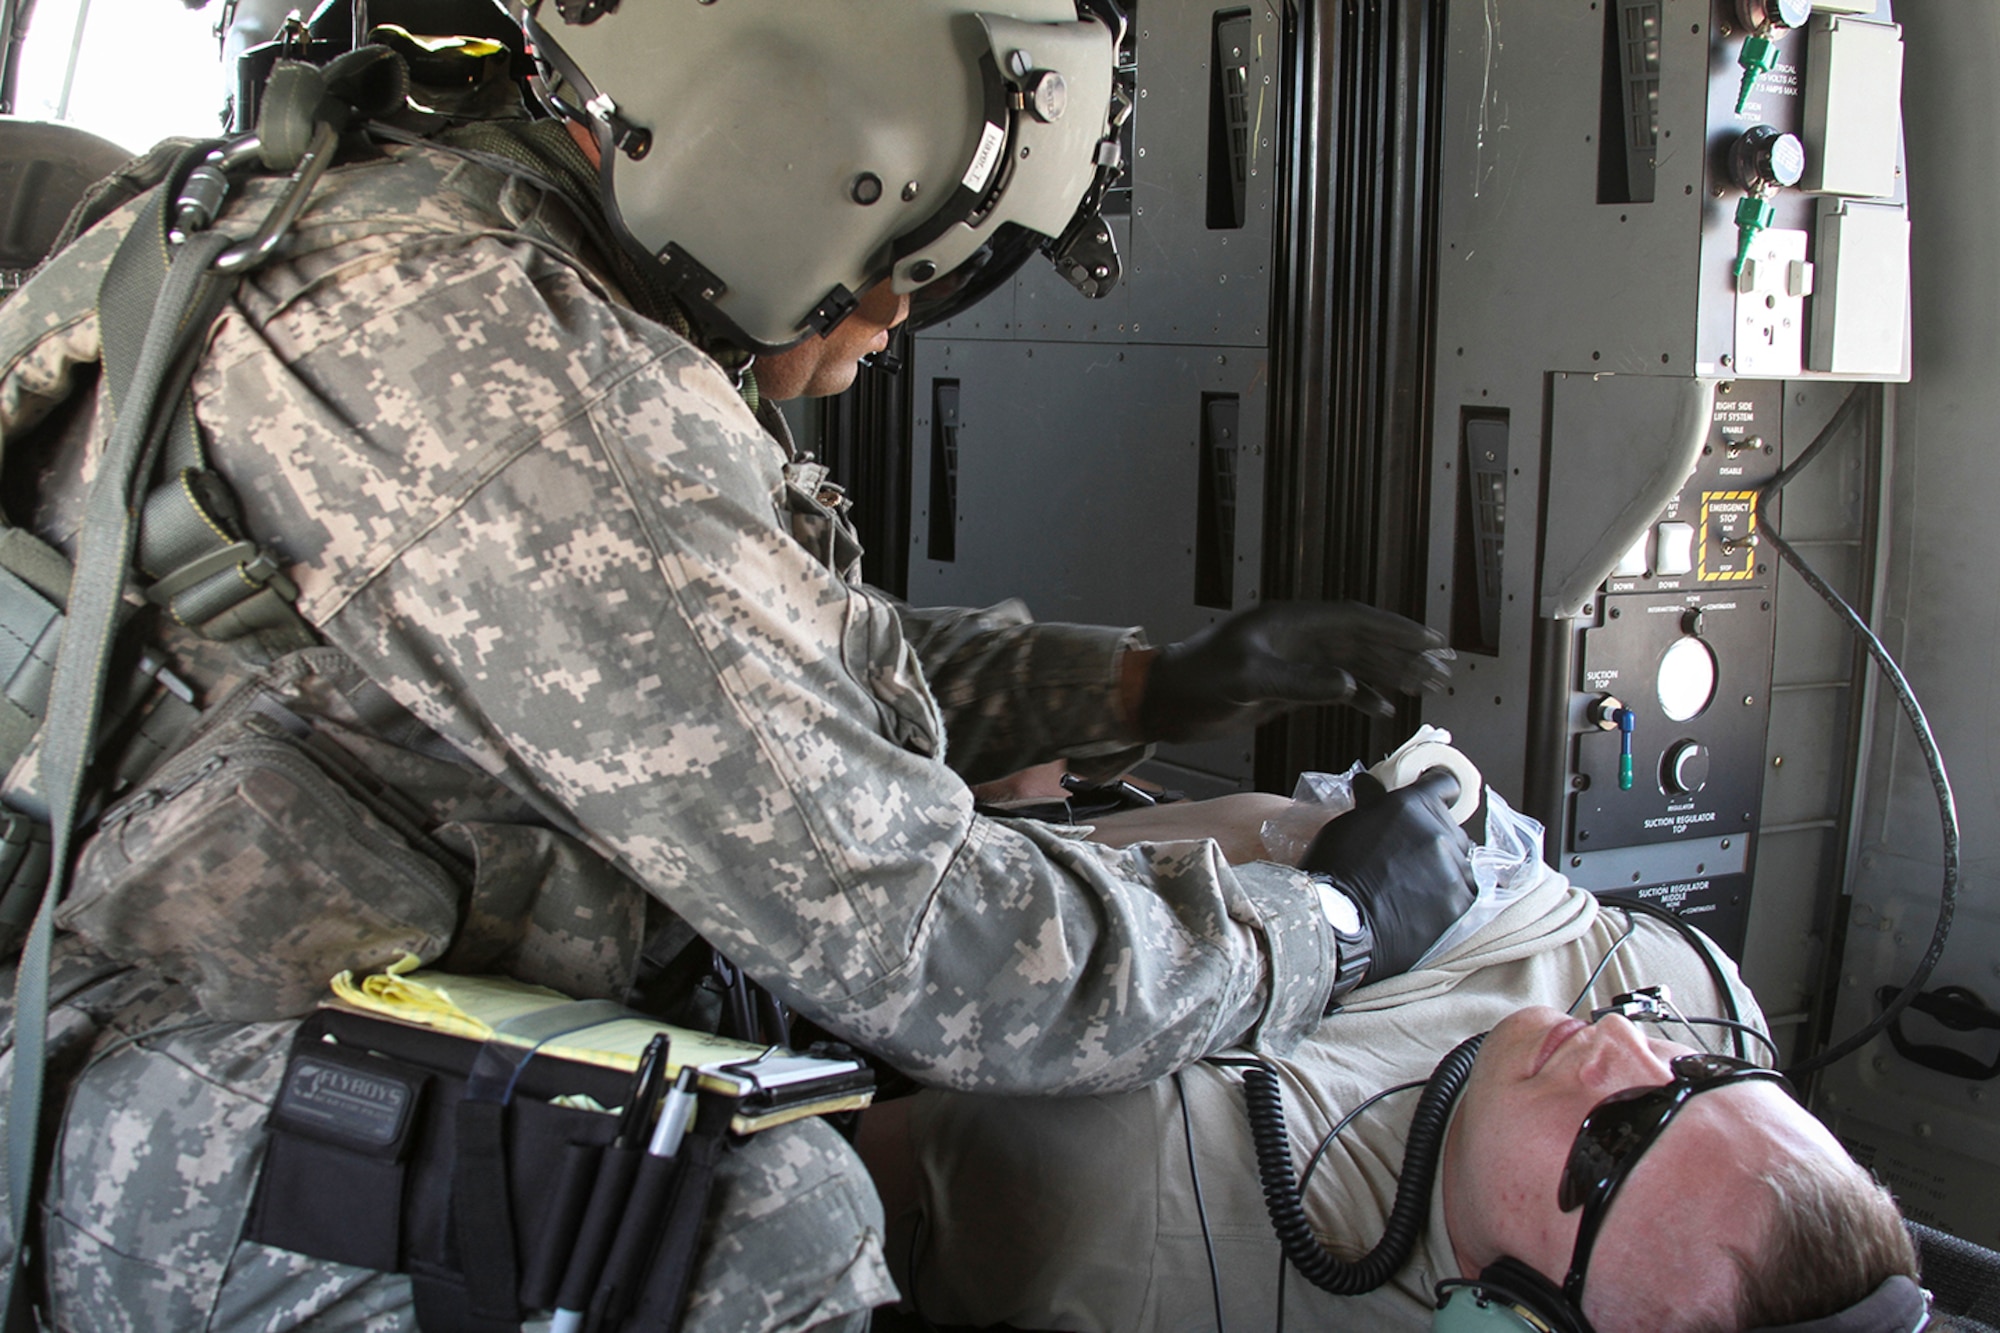 Spc. T.J. Hayer, a medical technician assigned to the 7th Battalion, 158th Aviation Regiment of the Army National Guard, provides simulated medical attention to Sgt. Ryan Swain’s sucking chest wound during a simulated casualty evacuation scenario as part of Exercise ANGEL THUNDER at Davis-Monthan AFB, Ariz., May 7, 2014.  ANGEL THUNDER is a multilateral annual exercise that to supports DoD’s training requirements for Personnel Recovery responsibilities through high–fidelity exercises.  Exercise ANGEL THUNDER focuses on scenarios that rescue forces are likely to face in current and future contingencies—increasing their combat readiness across a range of military options. (U.S. Air Force photo by Tech. Sgt. Heather R. Redman/Released)